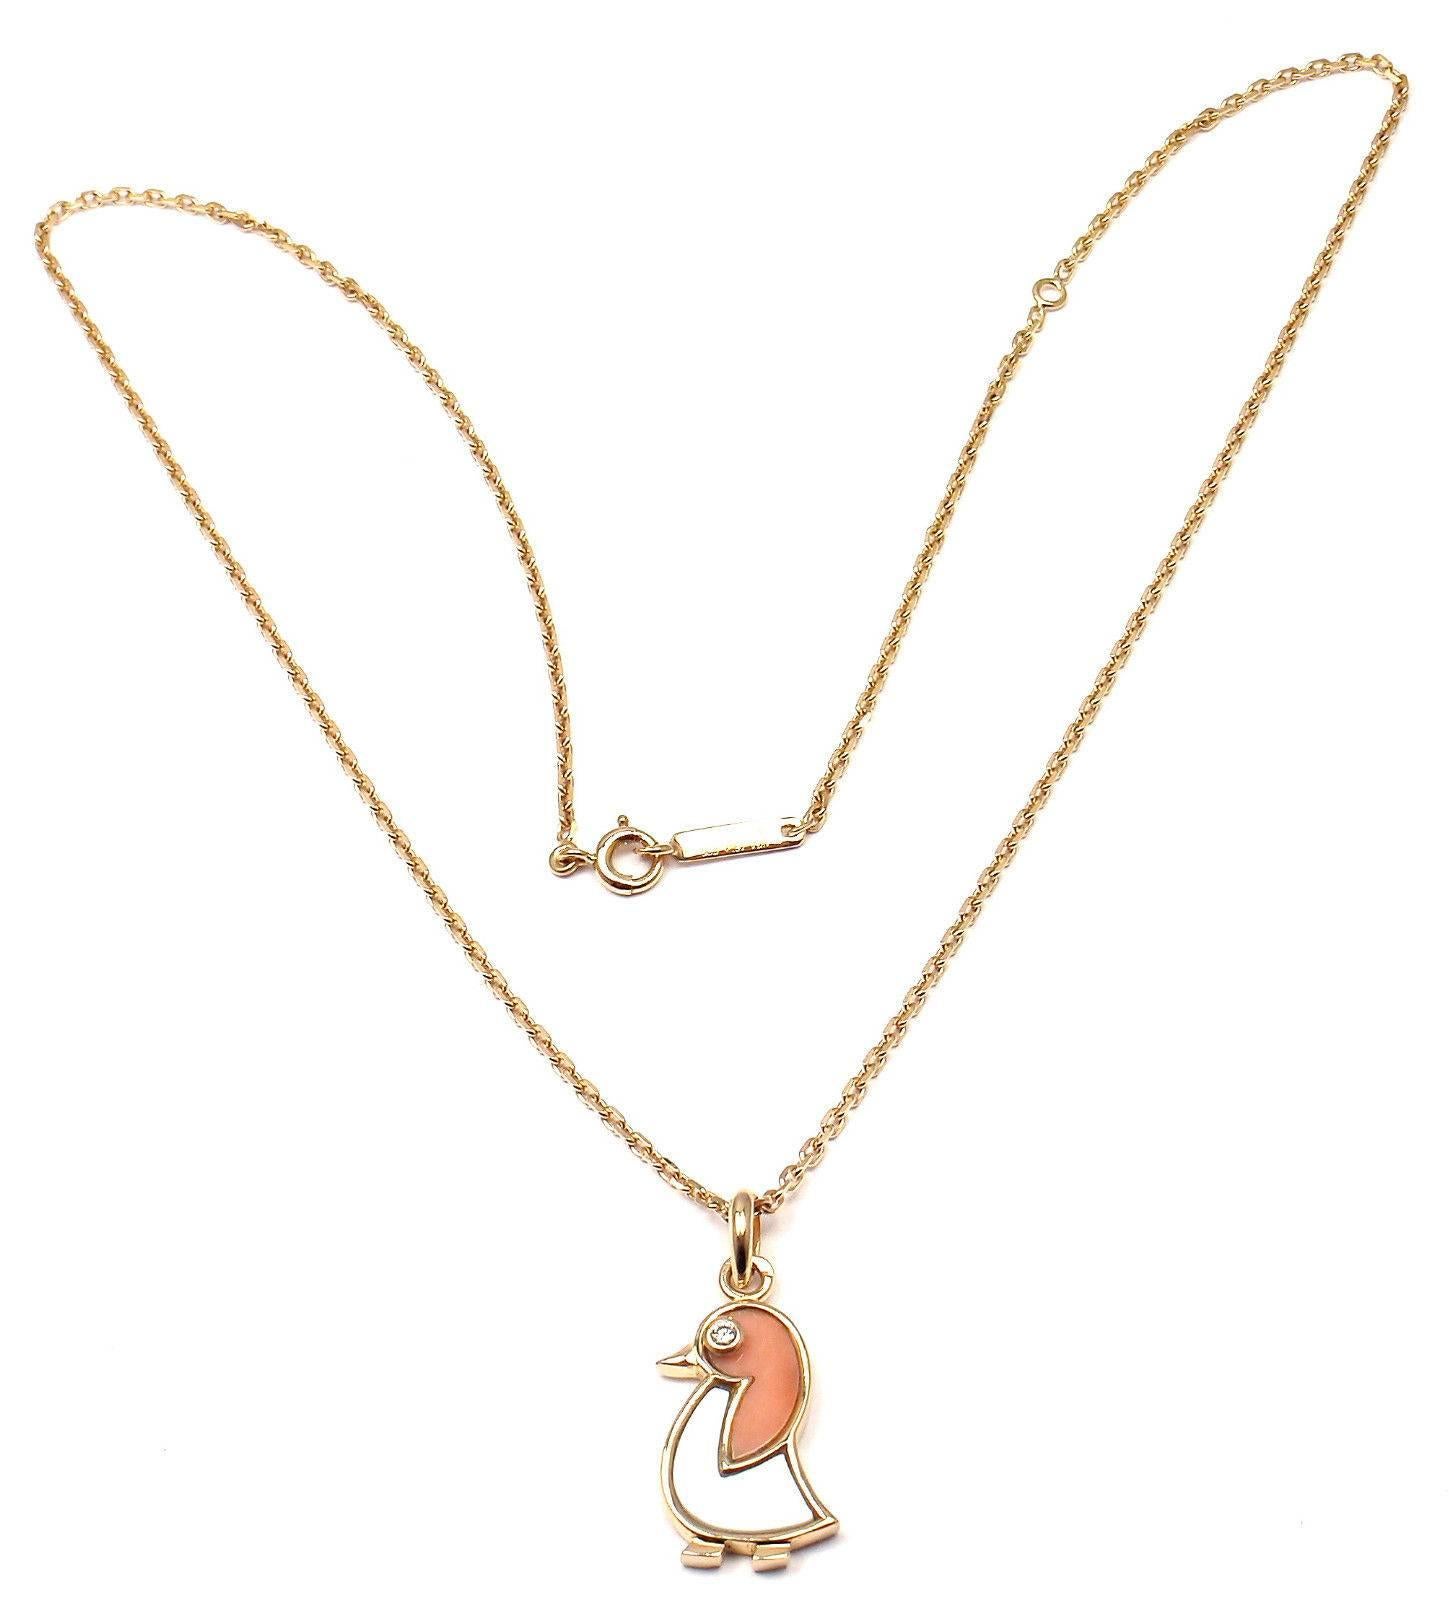 18k Yellow Gold Coral Mother Of Pearl And Diamond Pendant Necklace 
by Van Cleef & Arpels. 
With 1 round brilliant cut diamond
Coral & Mother of pearl  

Details: 
Length: 18